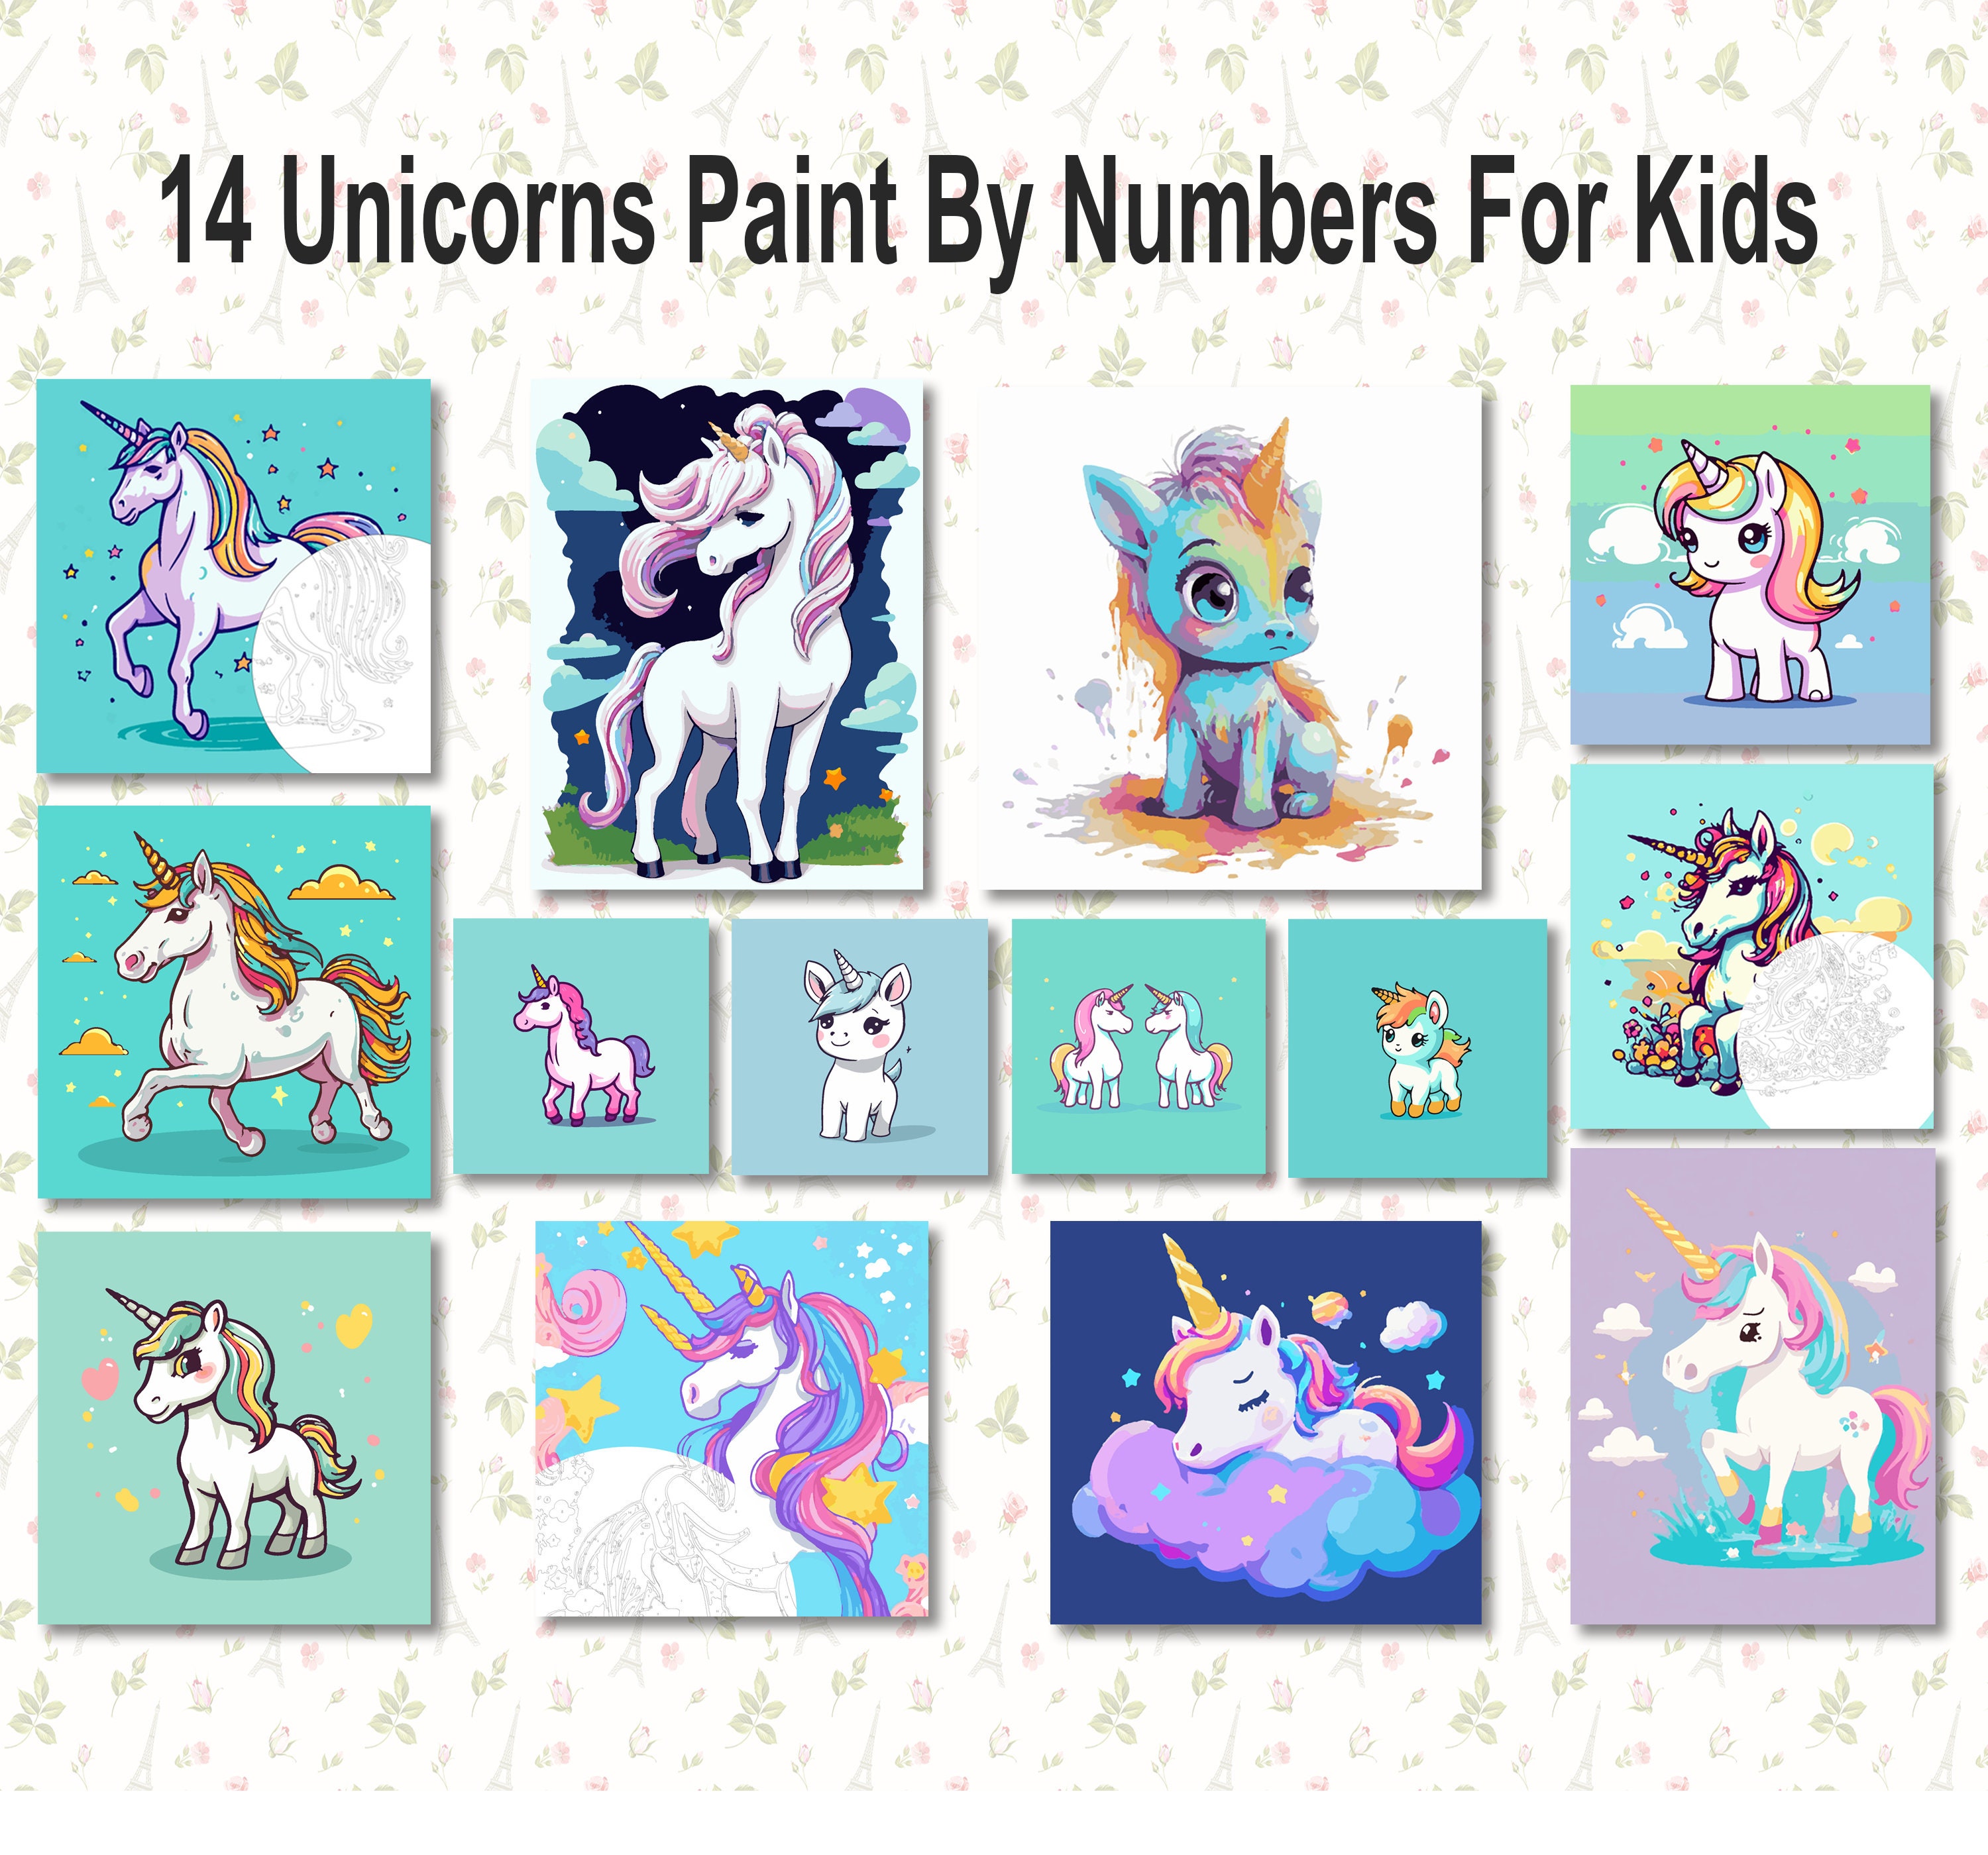 Unicorn - Paint by Numbers Kit (For Children) 10x10 inches